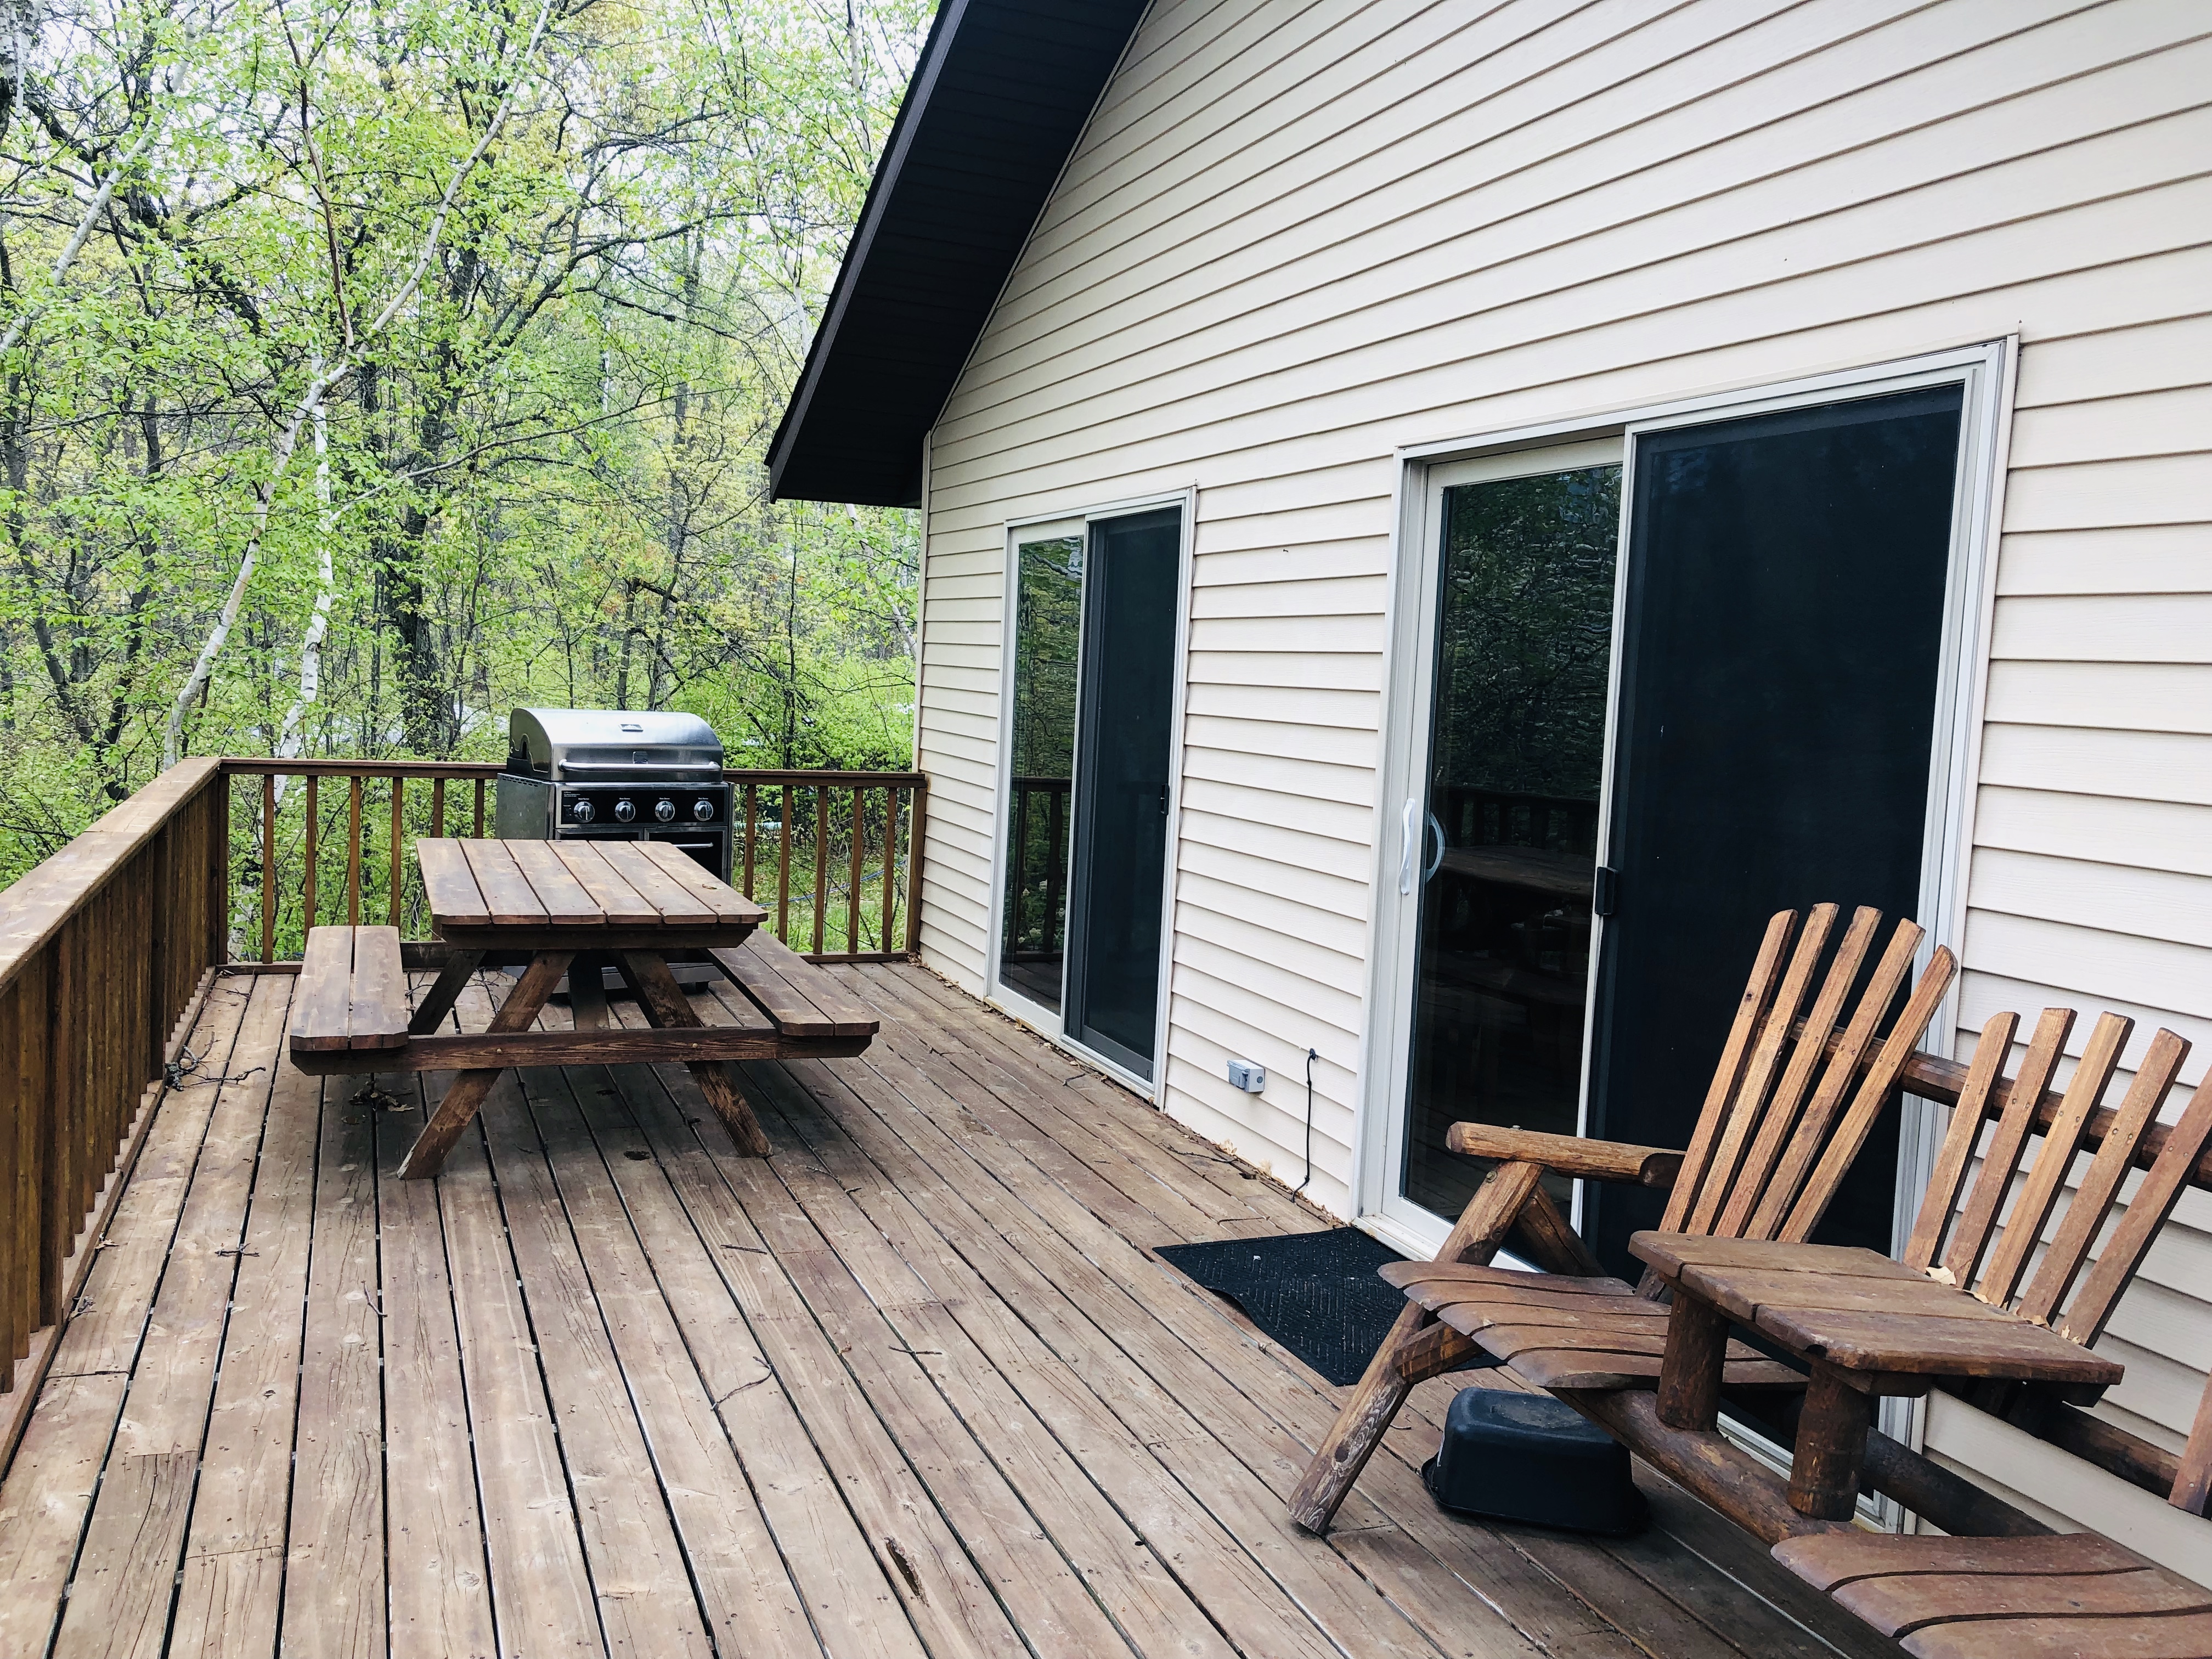 Virginian Pine patio with picnic table, Adirondack chairs and gas grill.